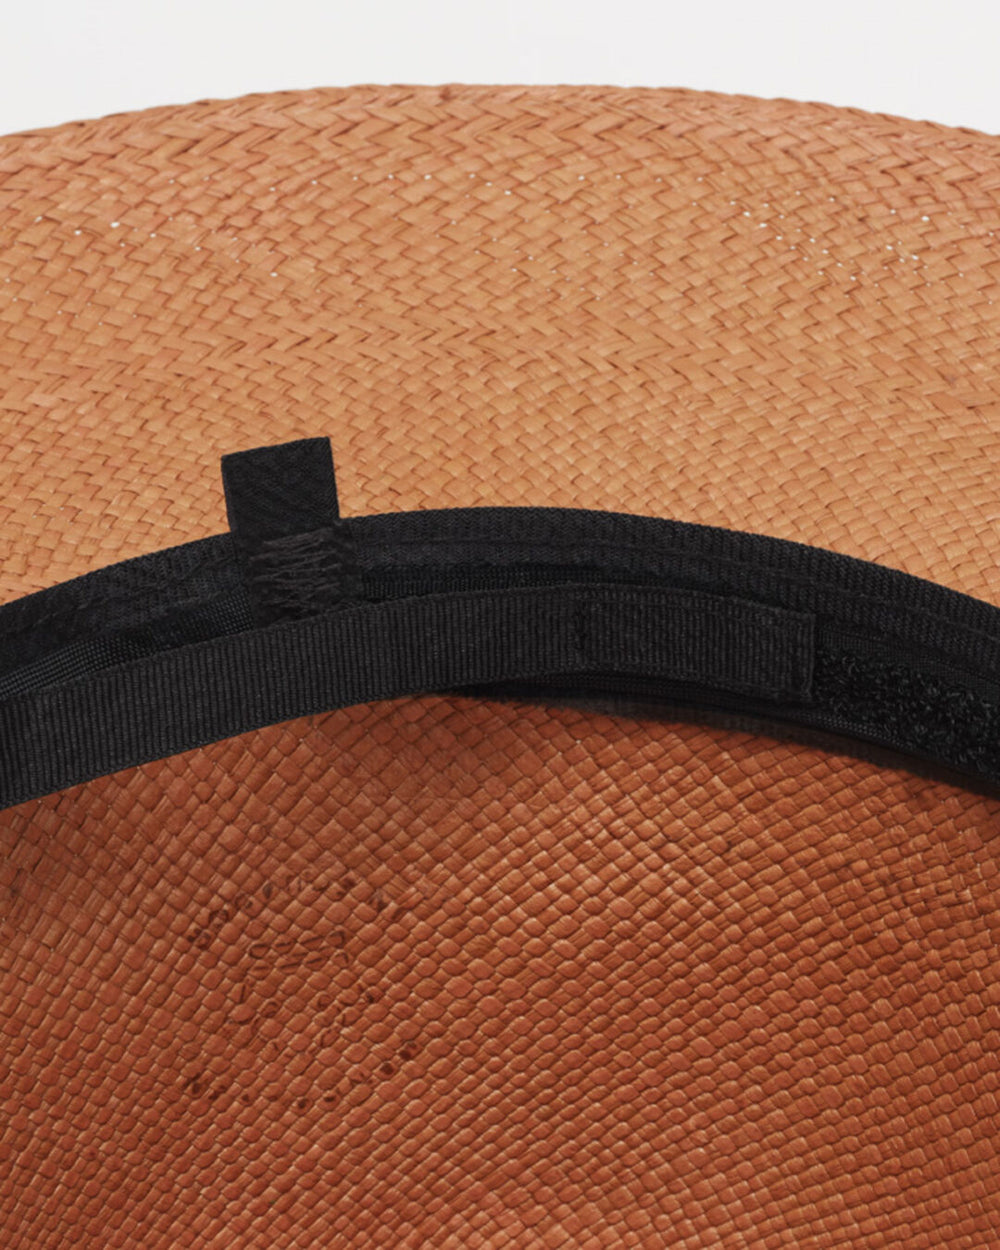 Close-up of a textured hat with a fabric band.